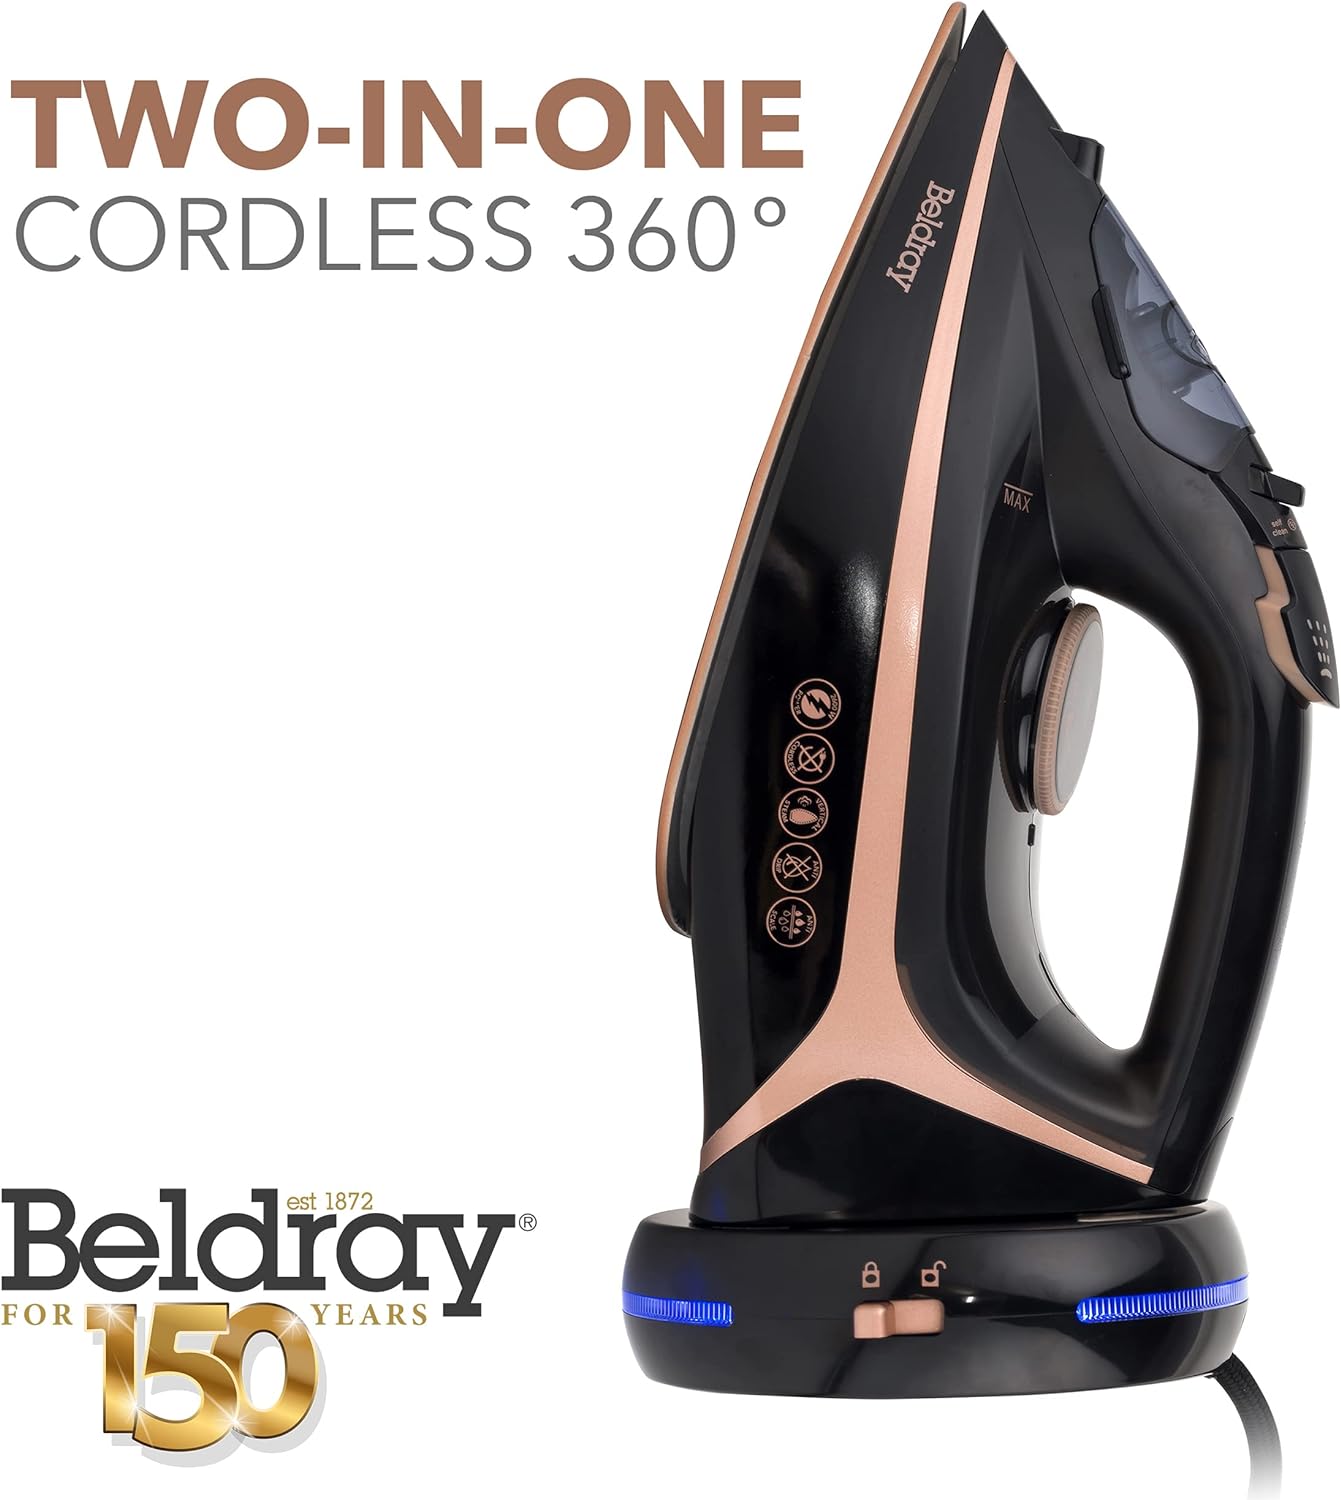 Beldray BEL0987RG 2 in 1 Cordless Steam Iron, 360° Charging Base 0154